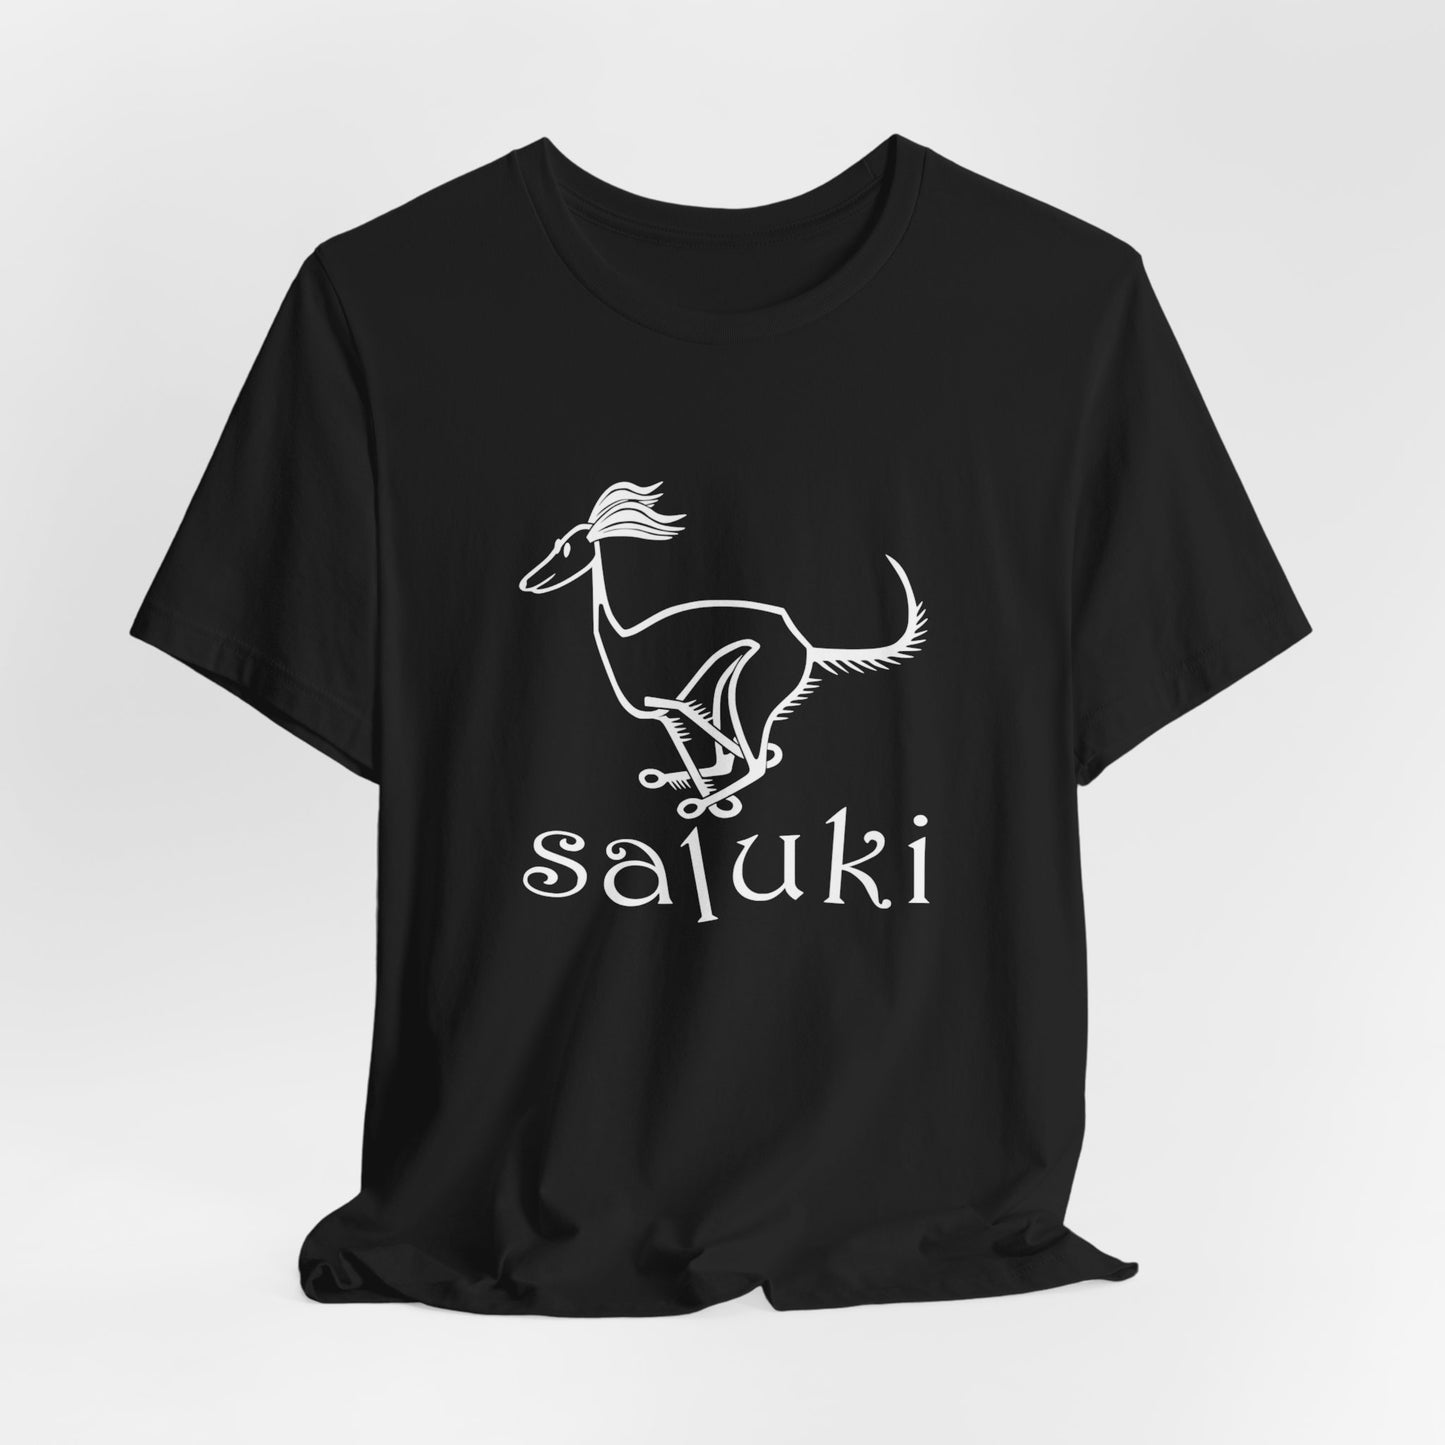 Unisex Jersey Short Sleeve Tee in white featuring a cartoon style Saluki dog galloping.